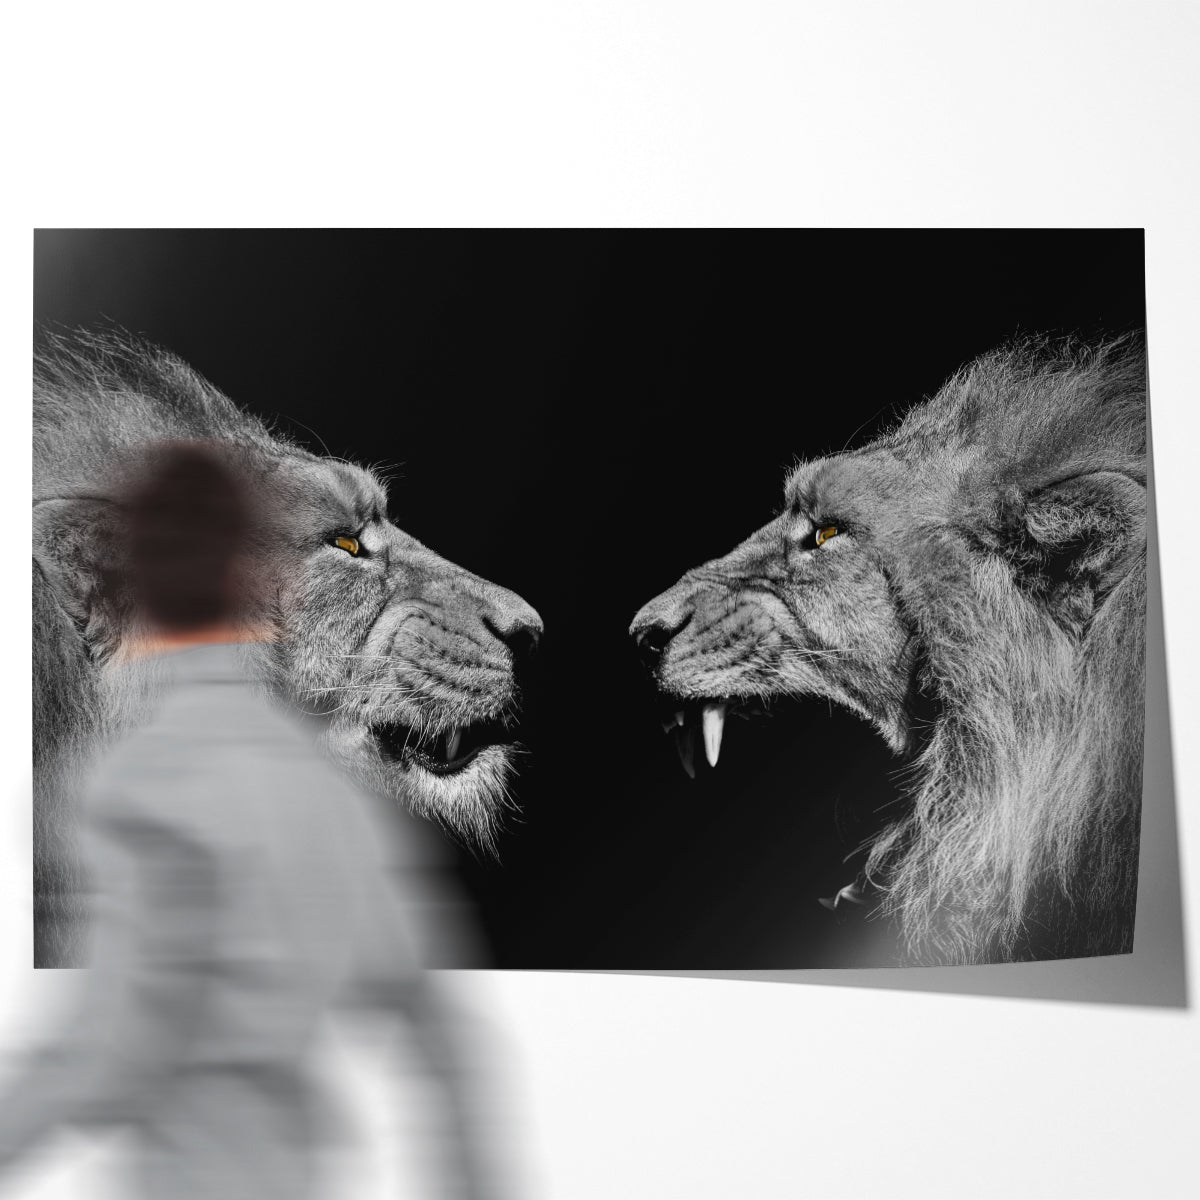 Two Lions Black White Portrait Motivational Posters For Office-Horizontal Posters NOT FRAMED-CetArt-10″x8″ inches-CetArt